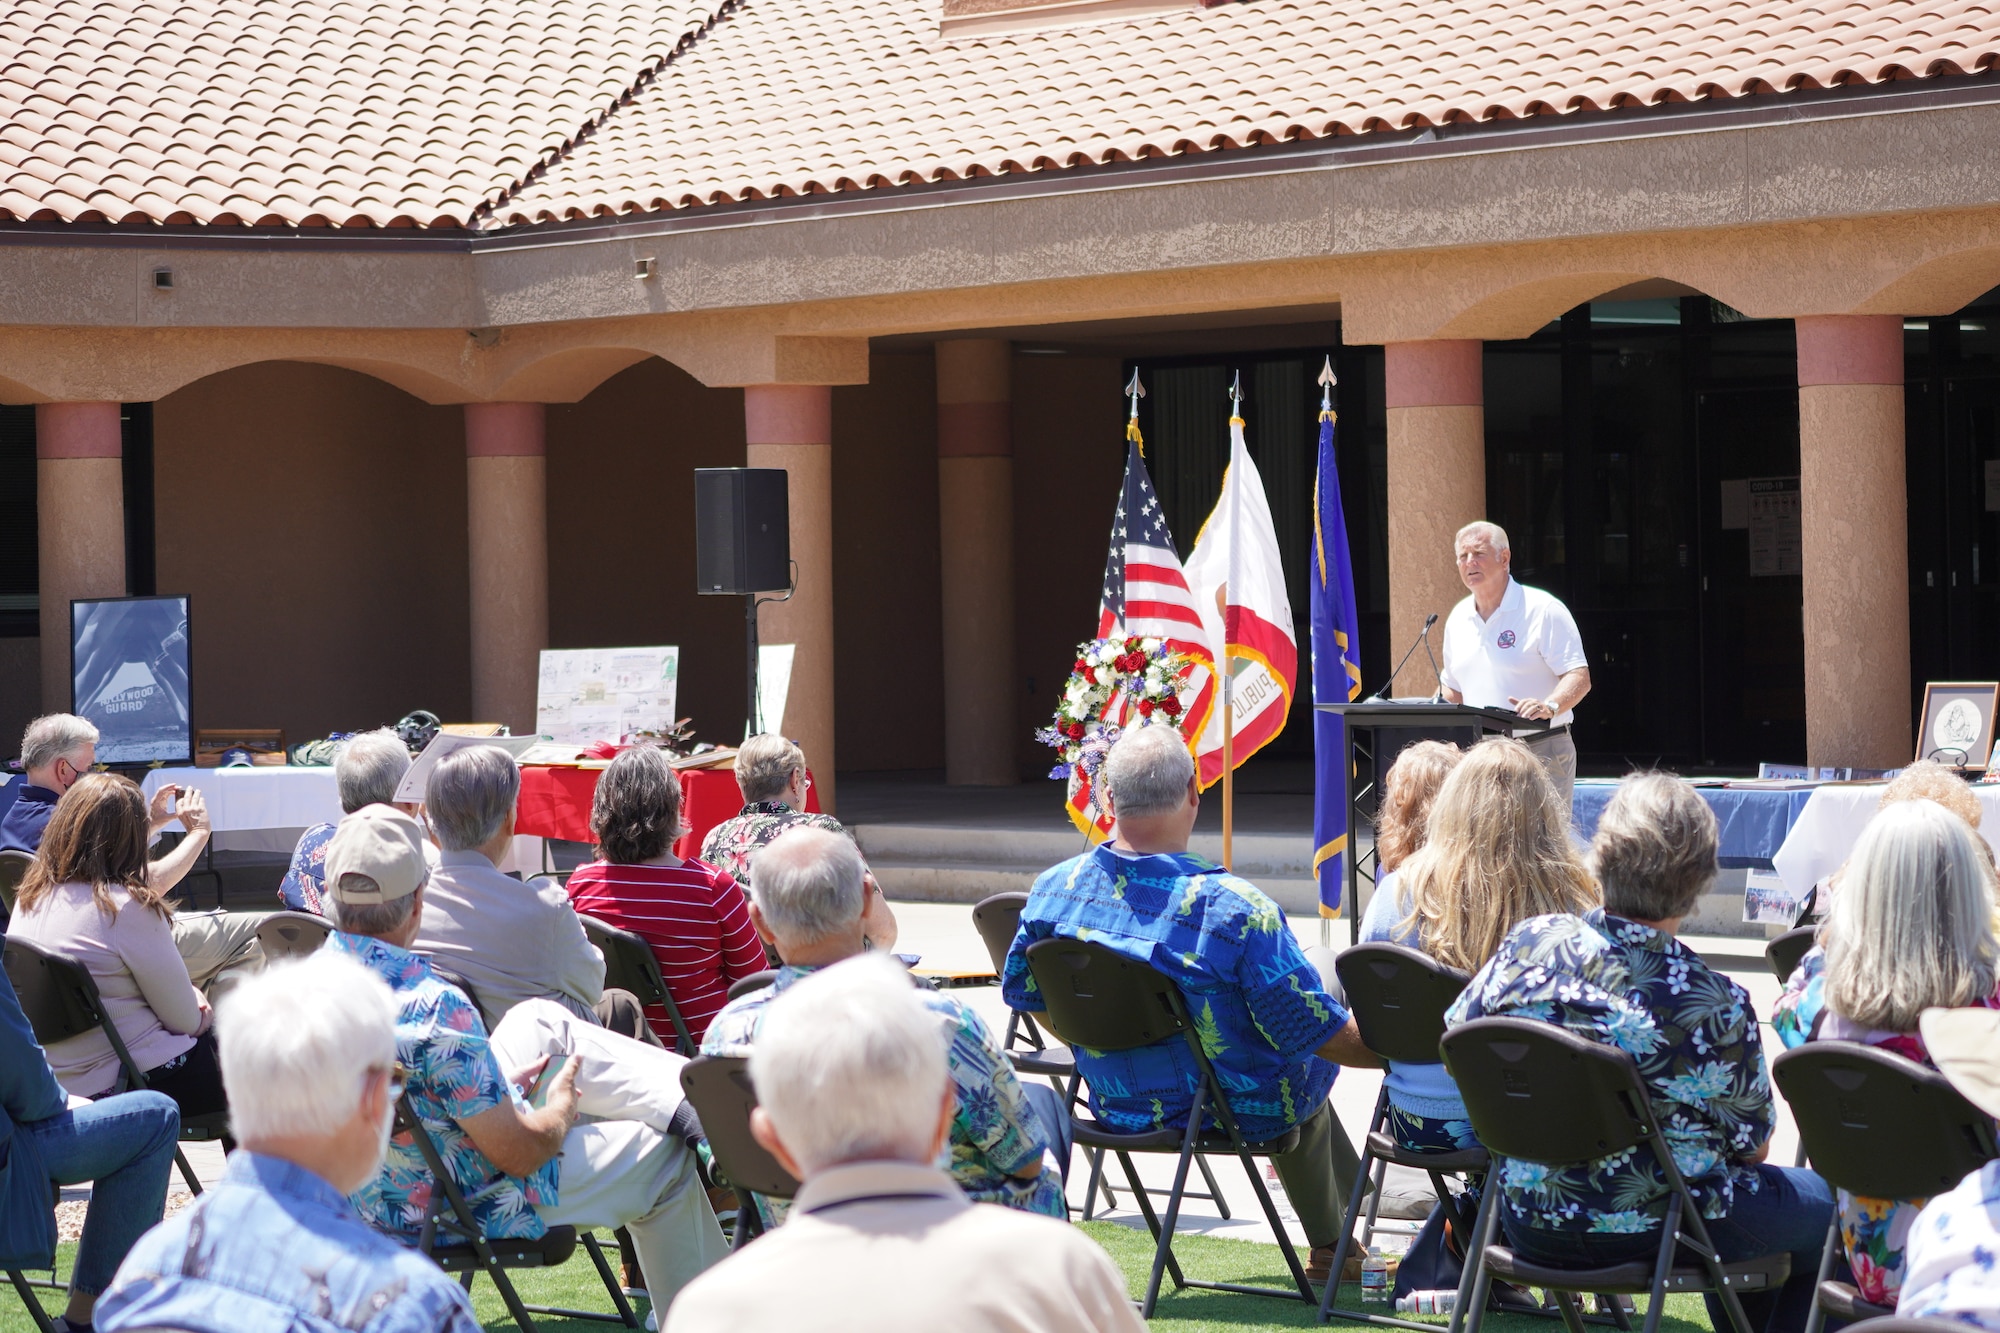 A picture of an alumni guest speaker talking to an audience at a celebration of life inside the heritage square plaza at Channel Islands Air National Guard Station.